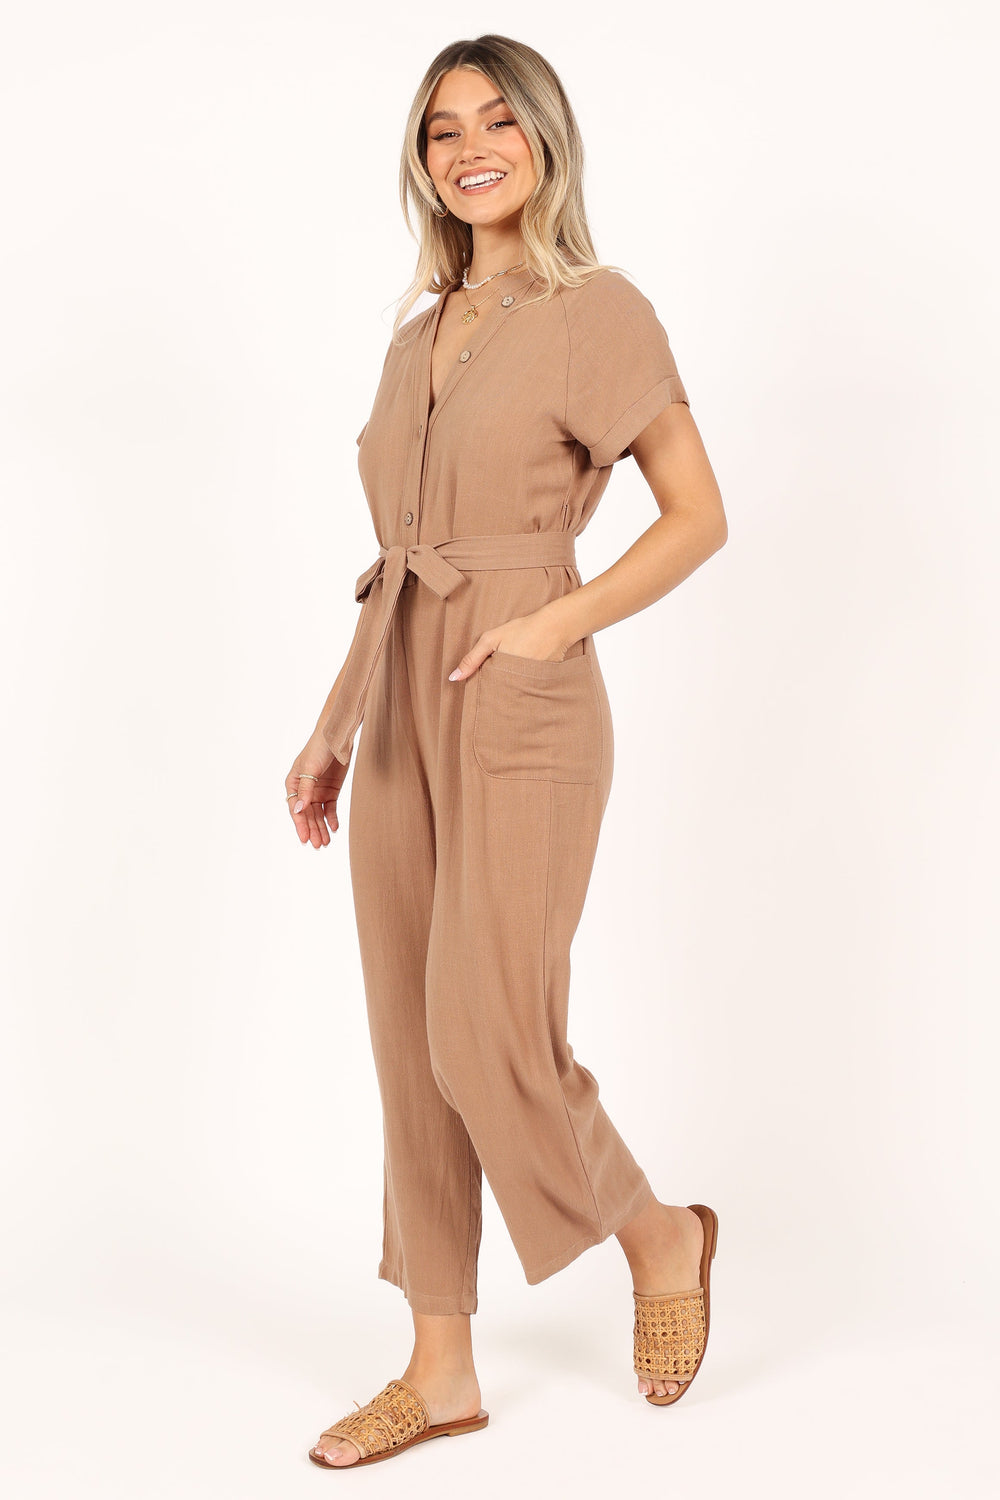 Petal and Pup USA Rompers Archie Jumpsuit - Mocha